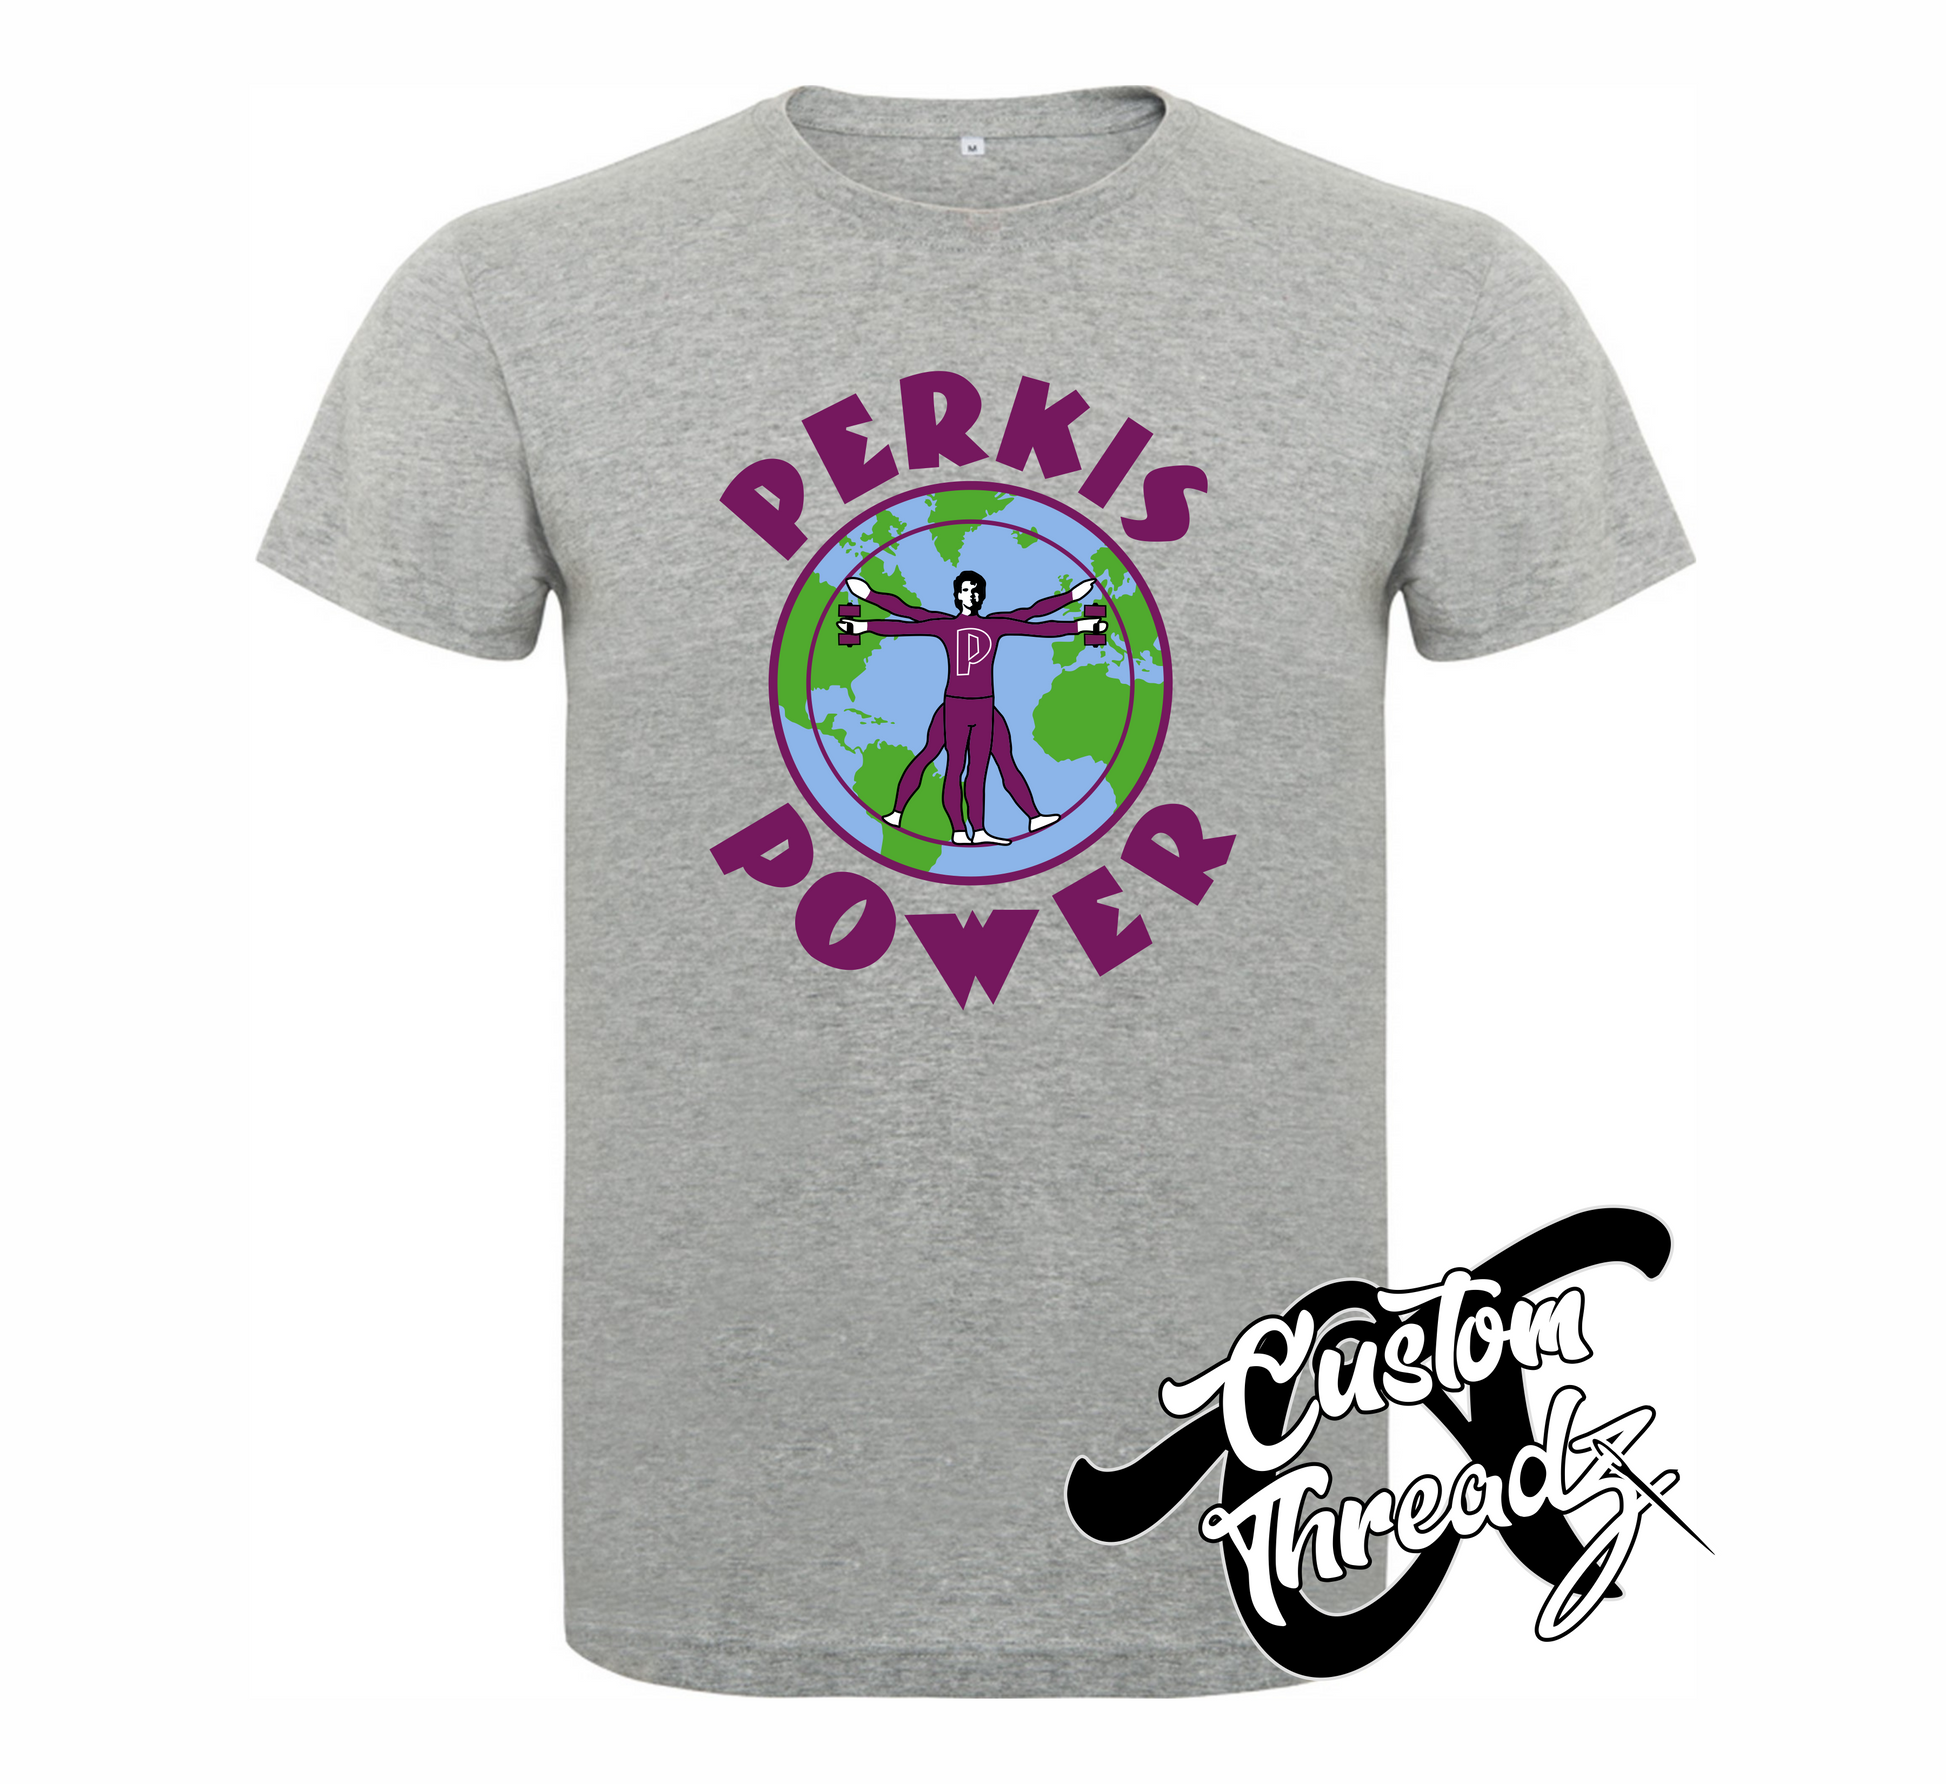 athletic heather grey youth tee with perkis power heavyweights DTG printed design